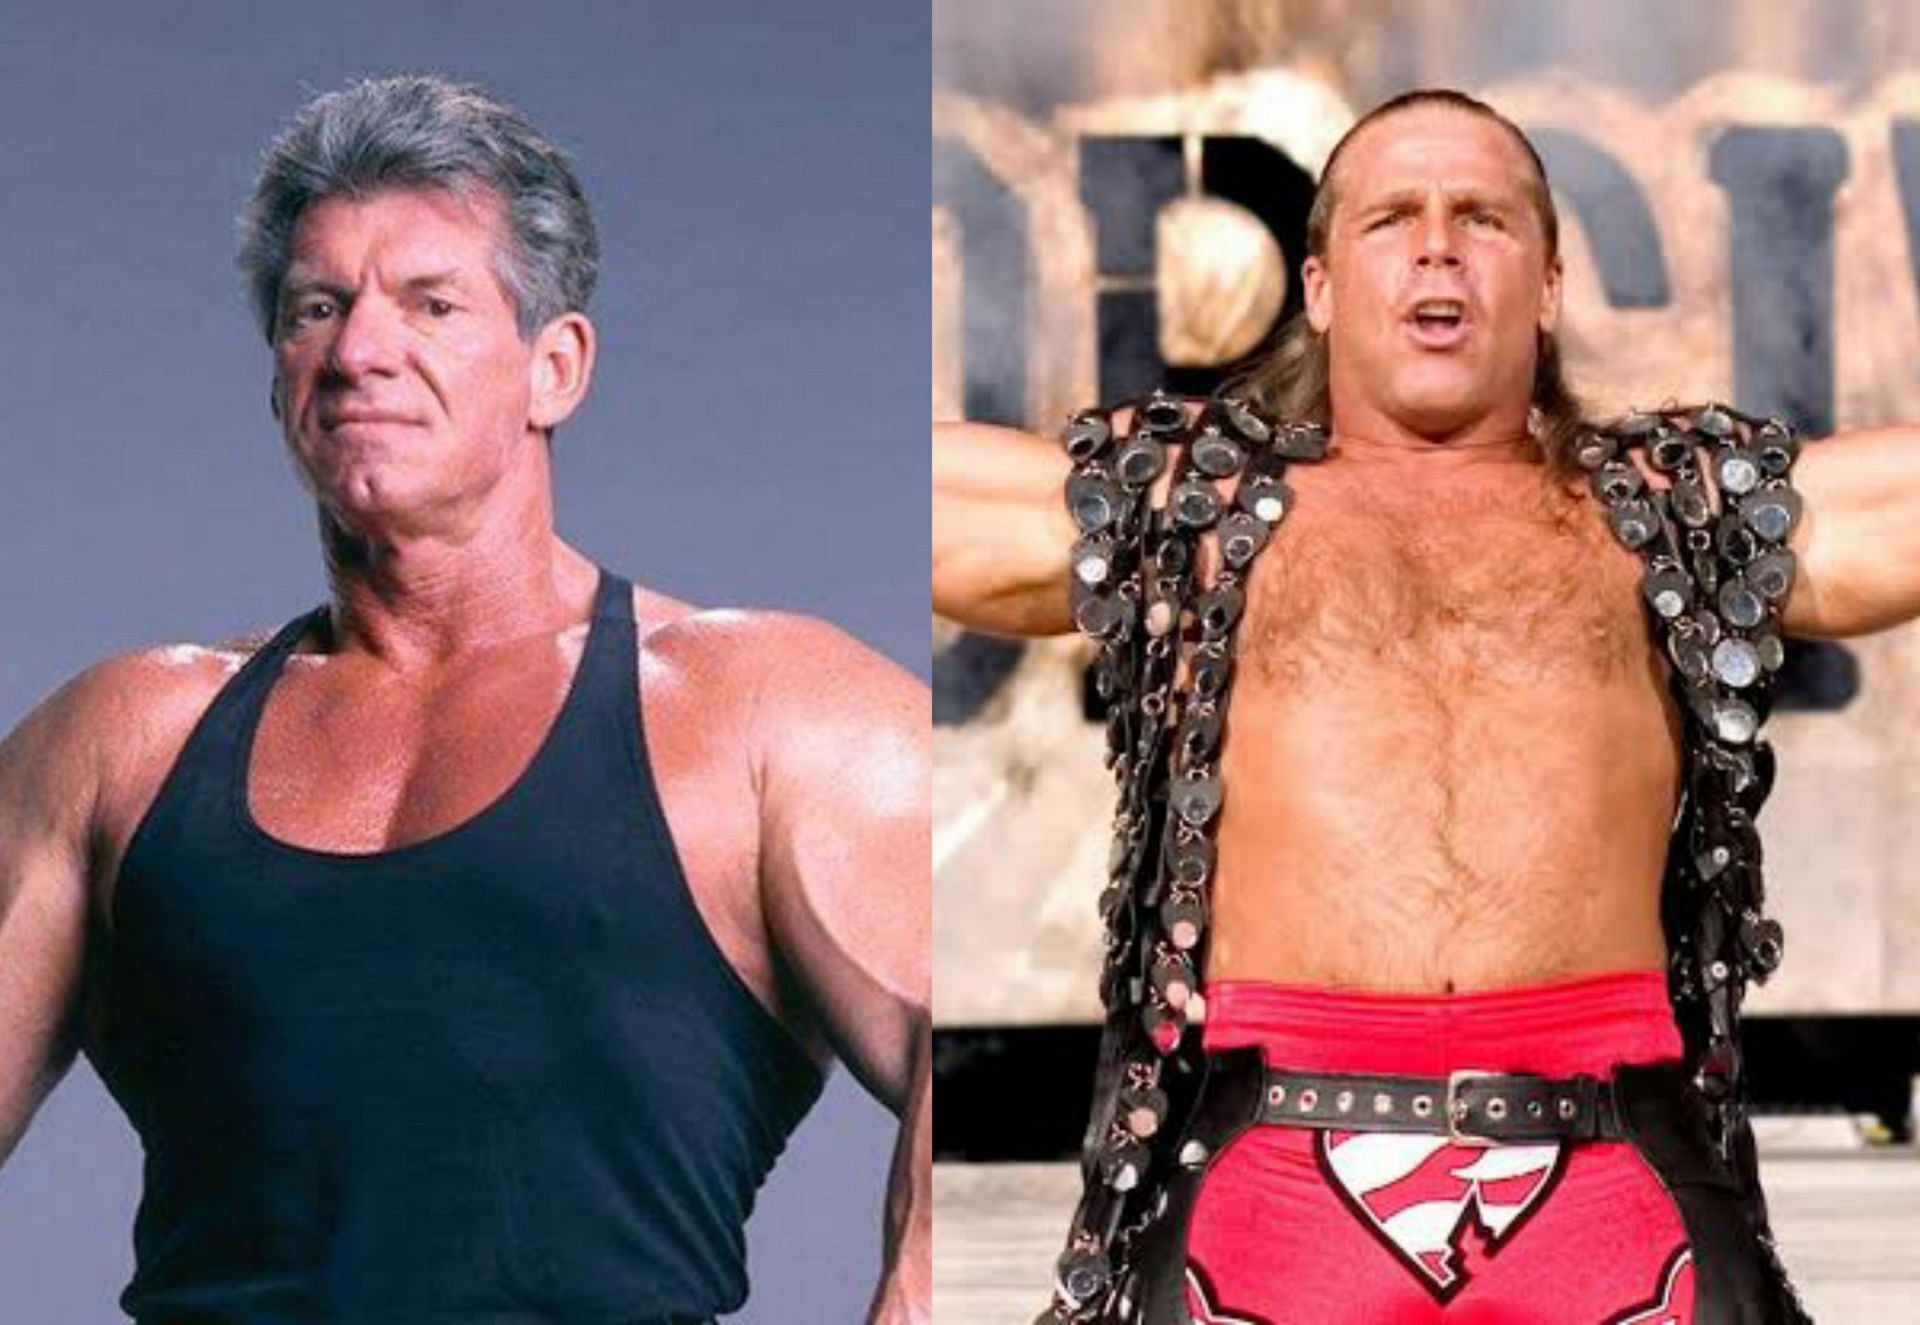 Shawn Michaels was the third to join the club